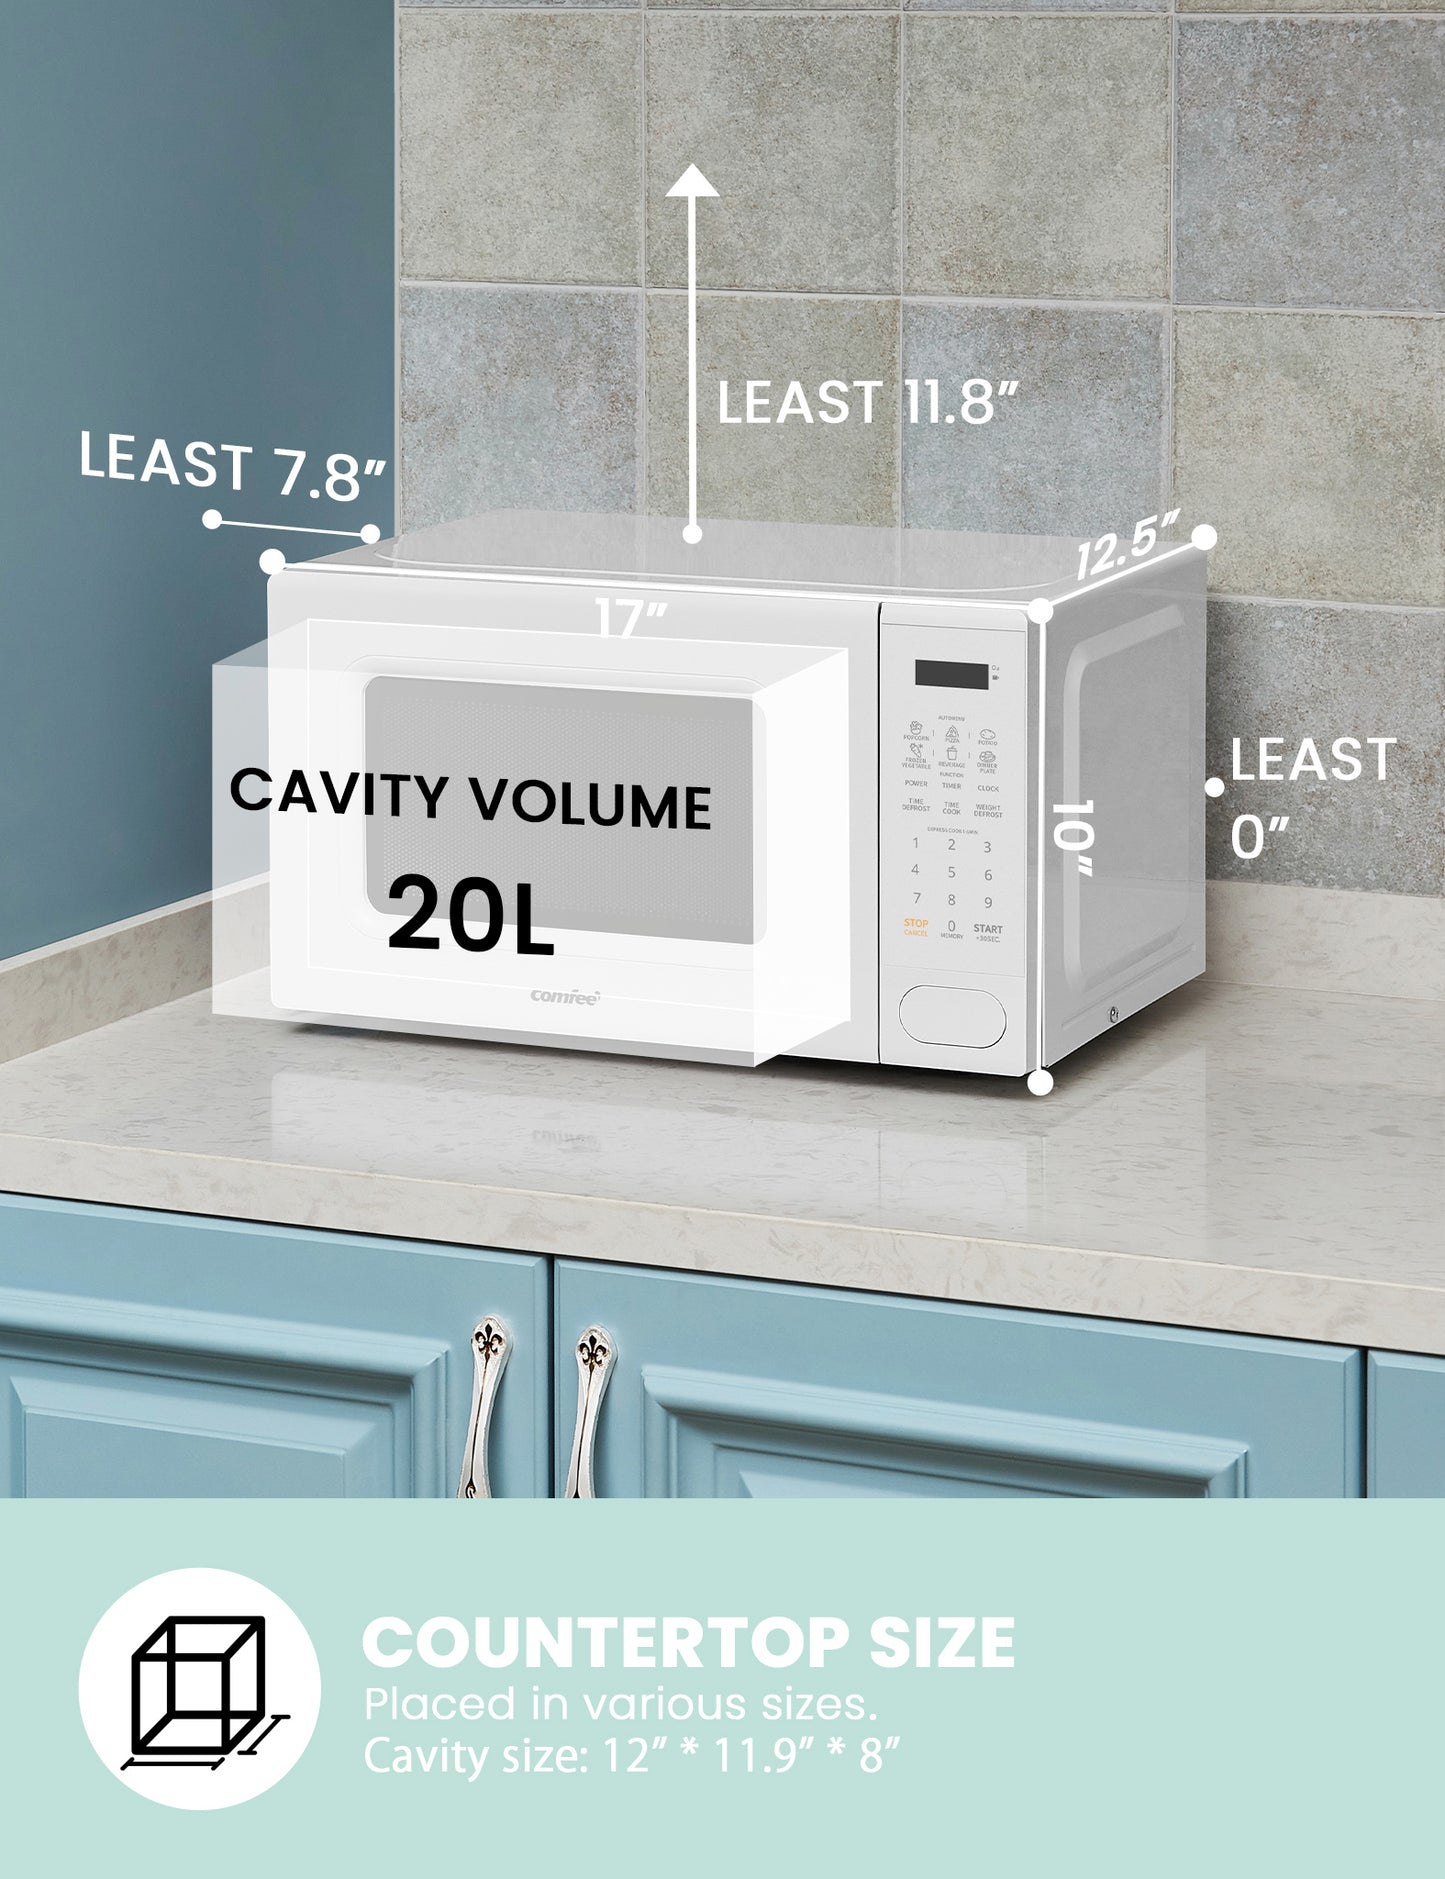 size dimensions of white comfee countertop microwave on a white patten kitchen countertop